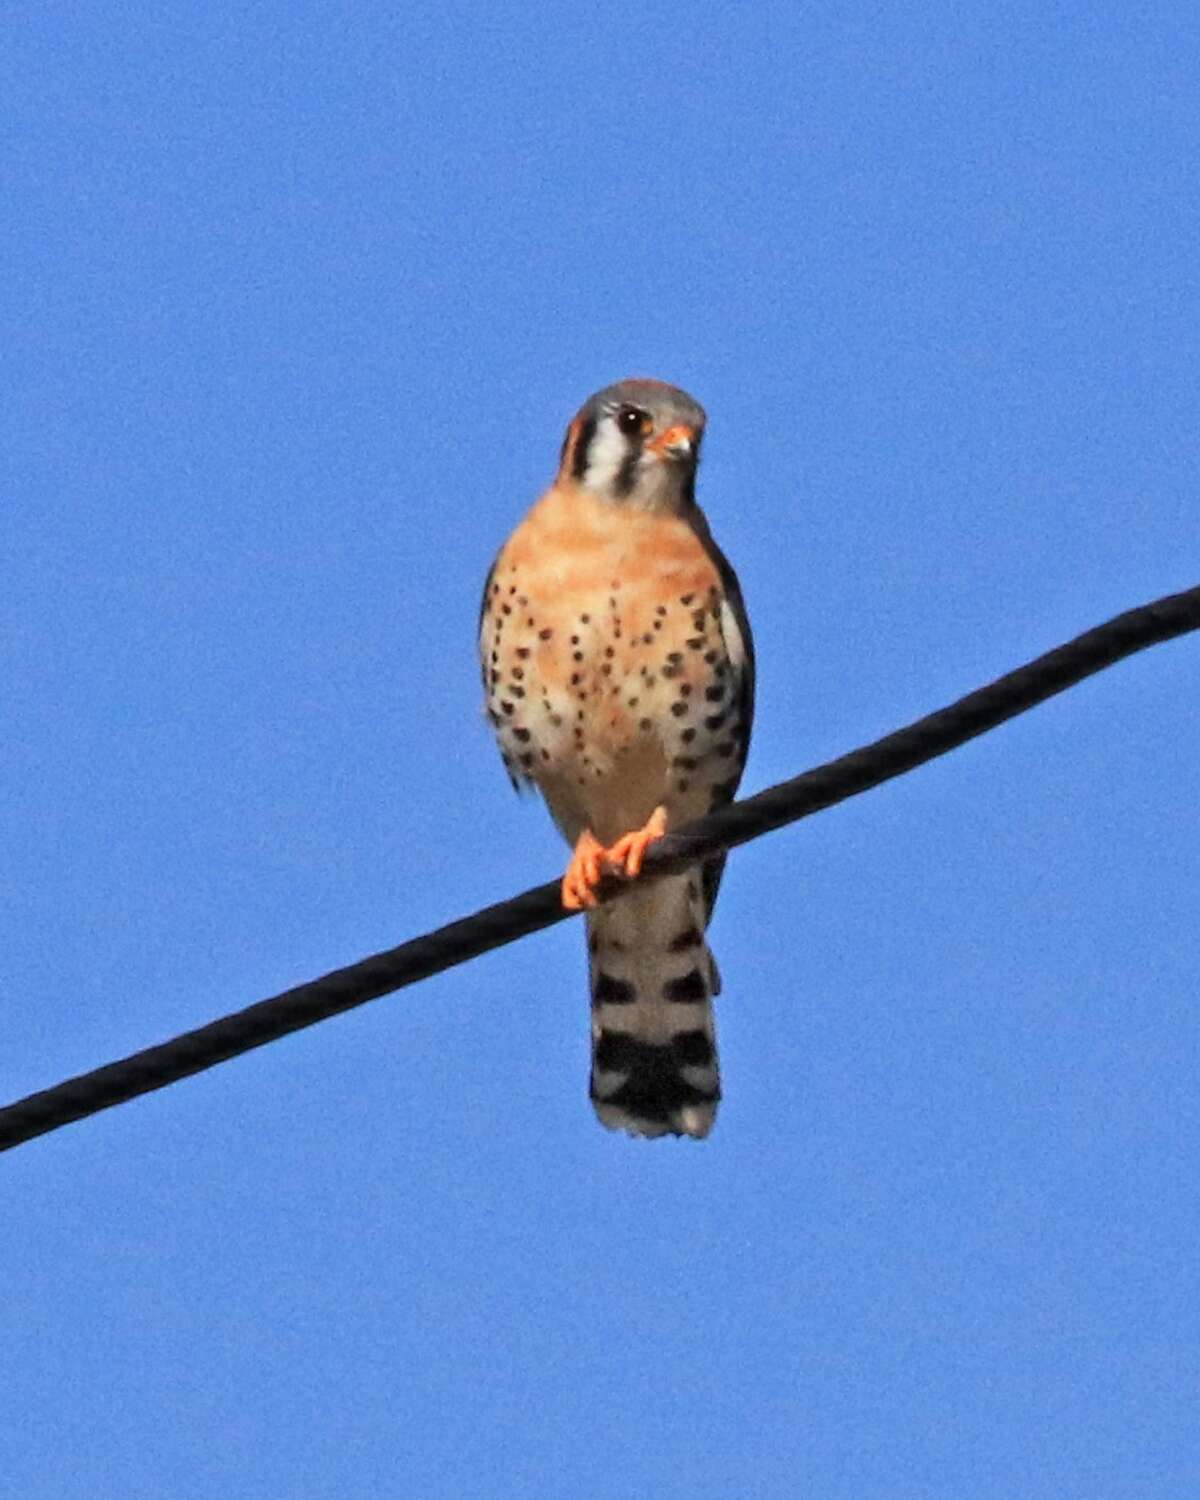 Barbara Nuffer of Averill Park says, "While on my daily walk on my country road I noticed two unusual birds hunting in the neighbor's farm fields."  Here is an American kestrel, the smallest falcon in North America."